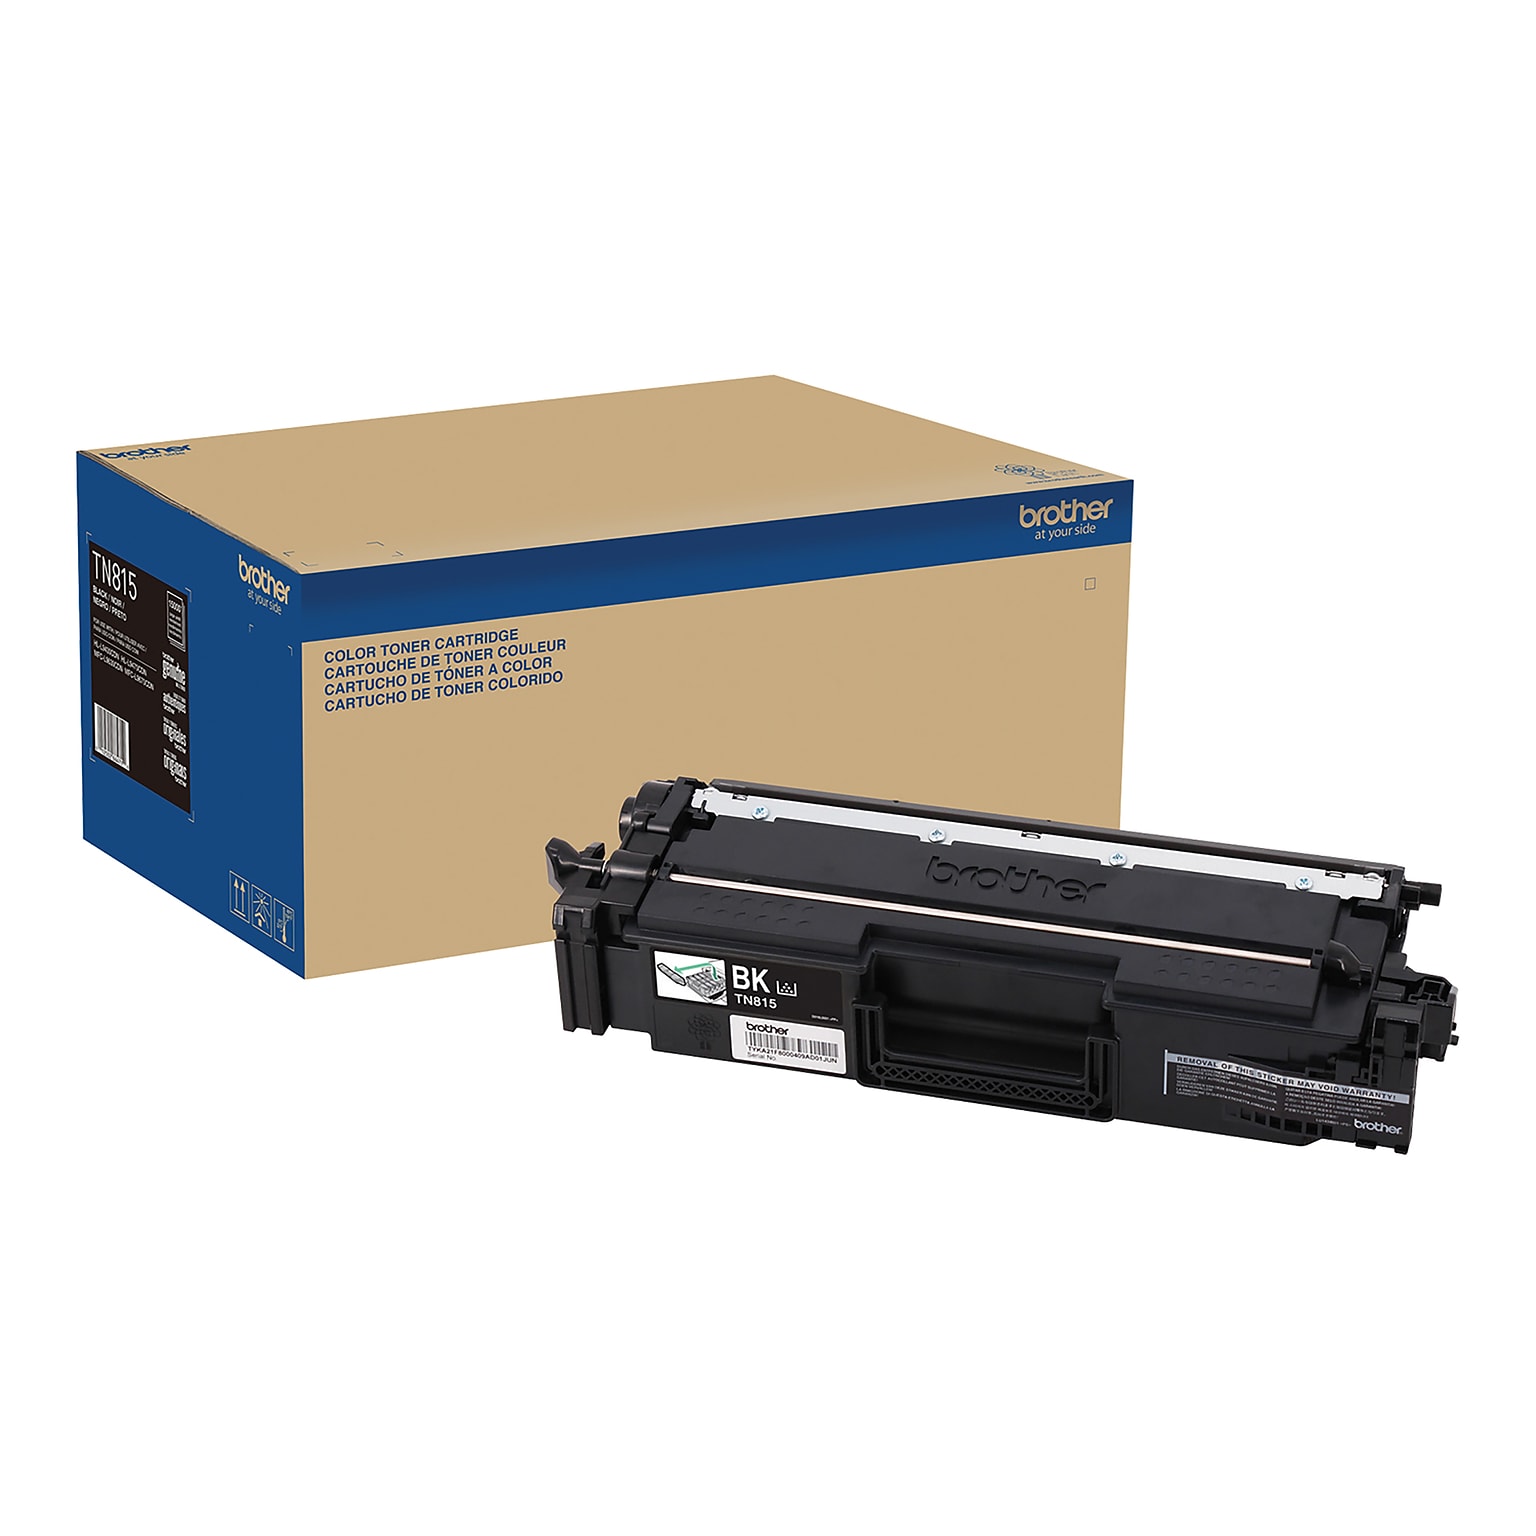 Brother TN815 Black Extra High Yield Toner Cartridge, Prints Up to 15,000 Pages (TN815BK)